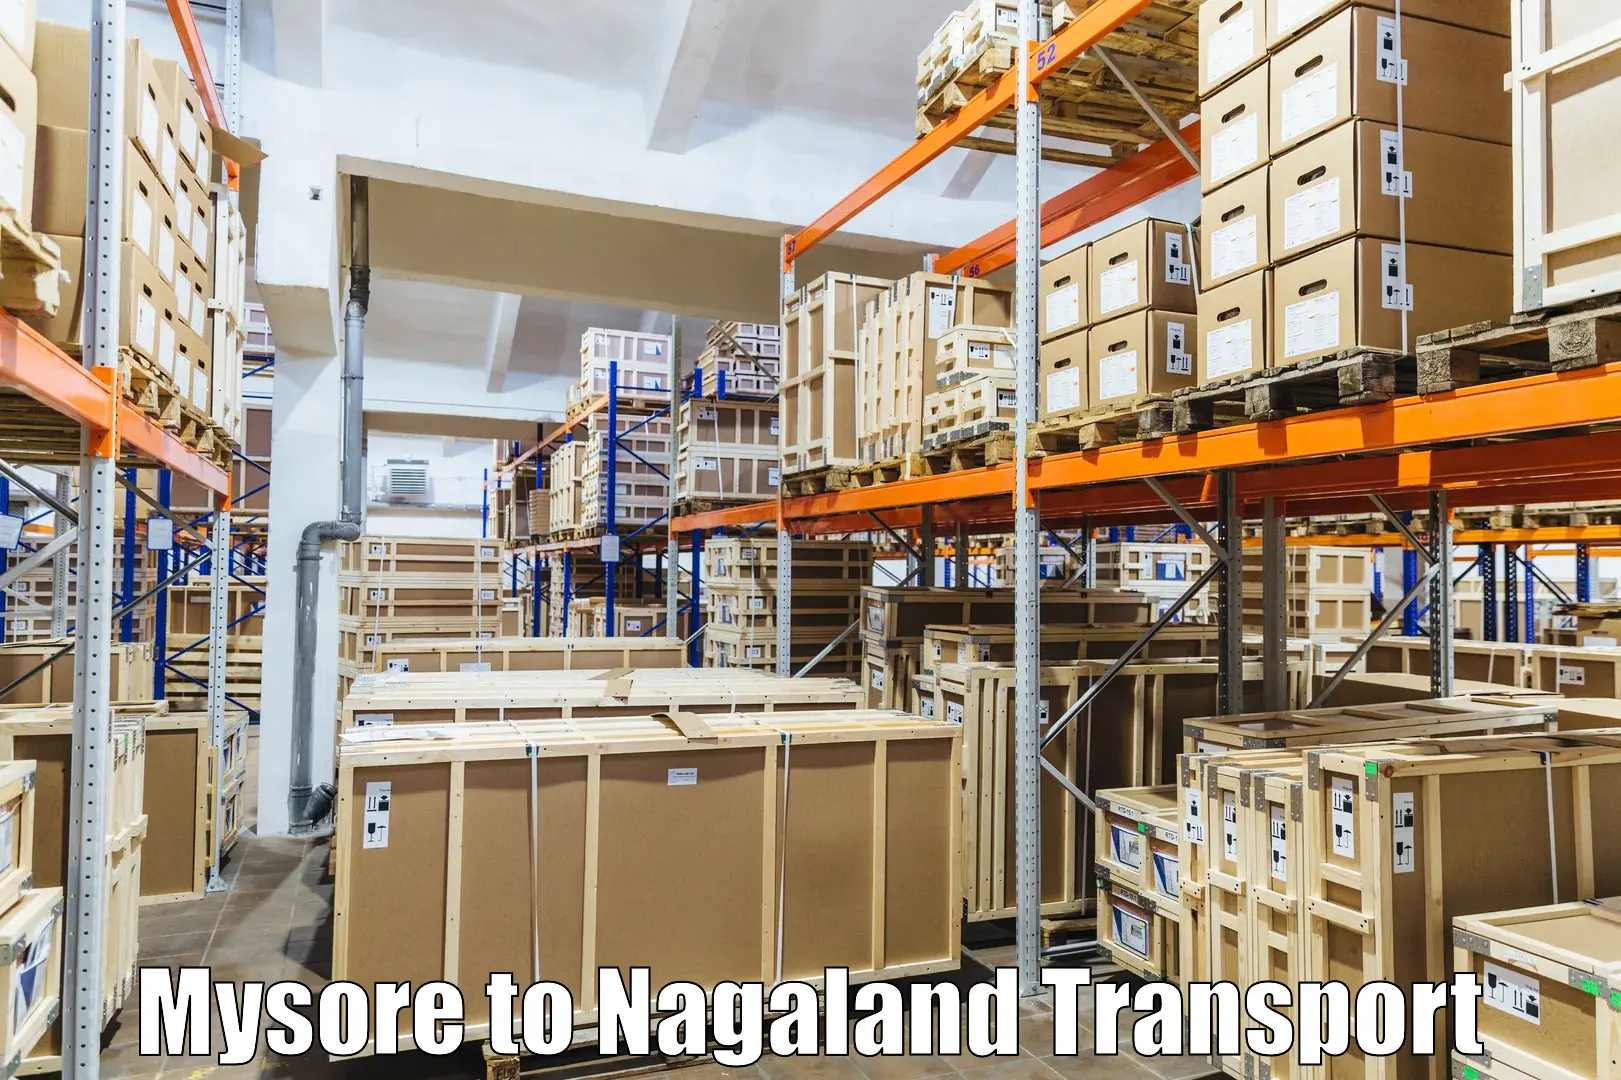 Container transport service Mysore to Nagaland